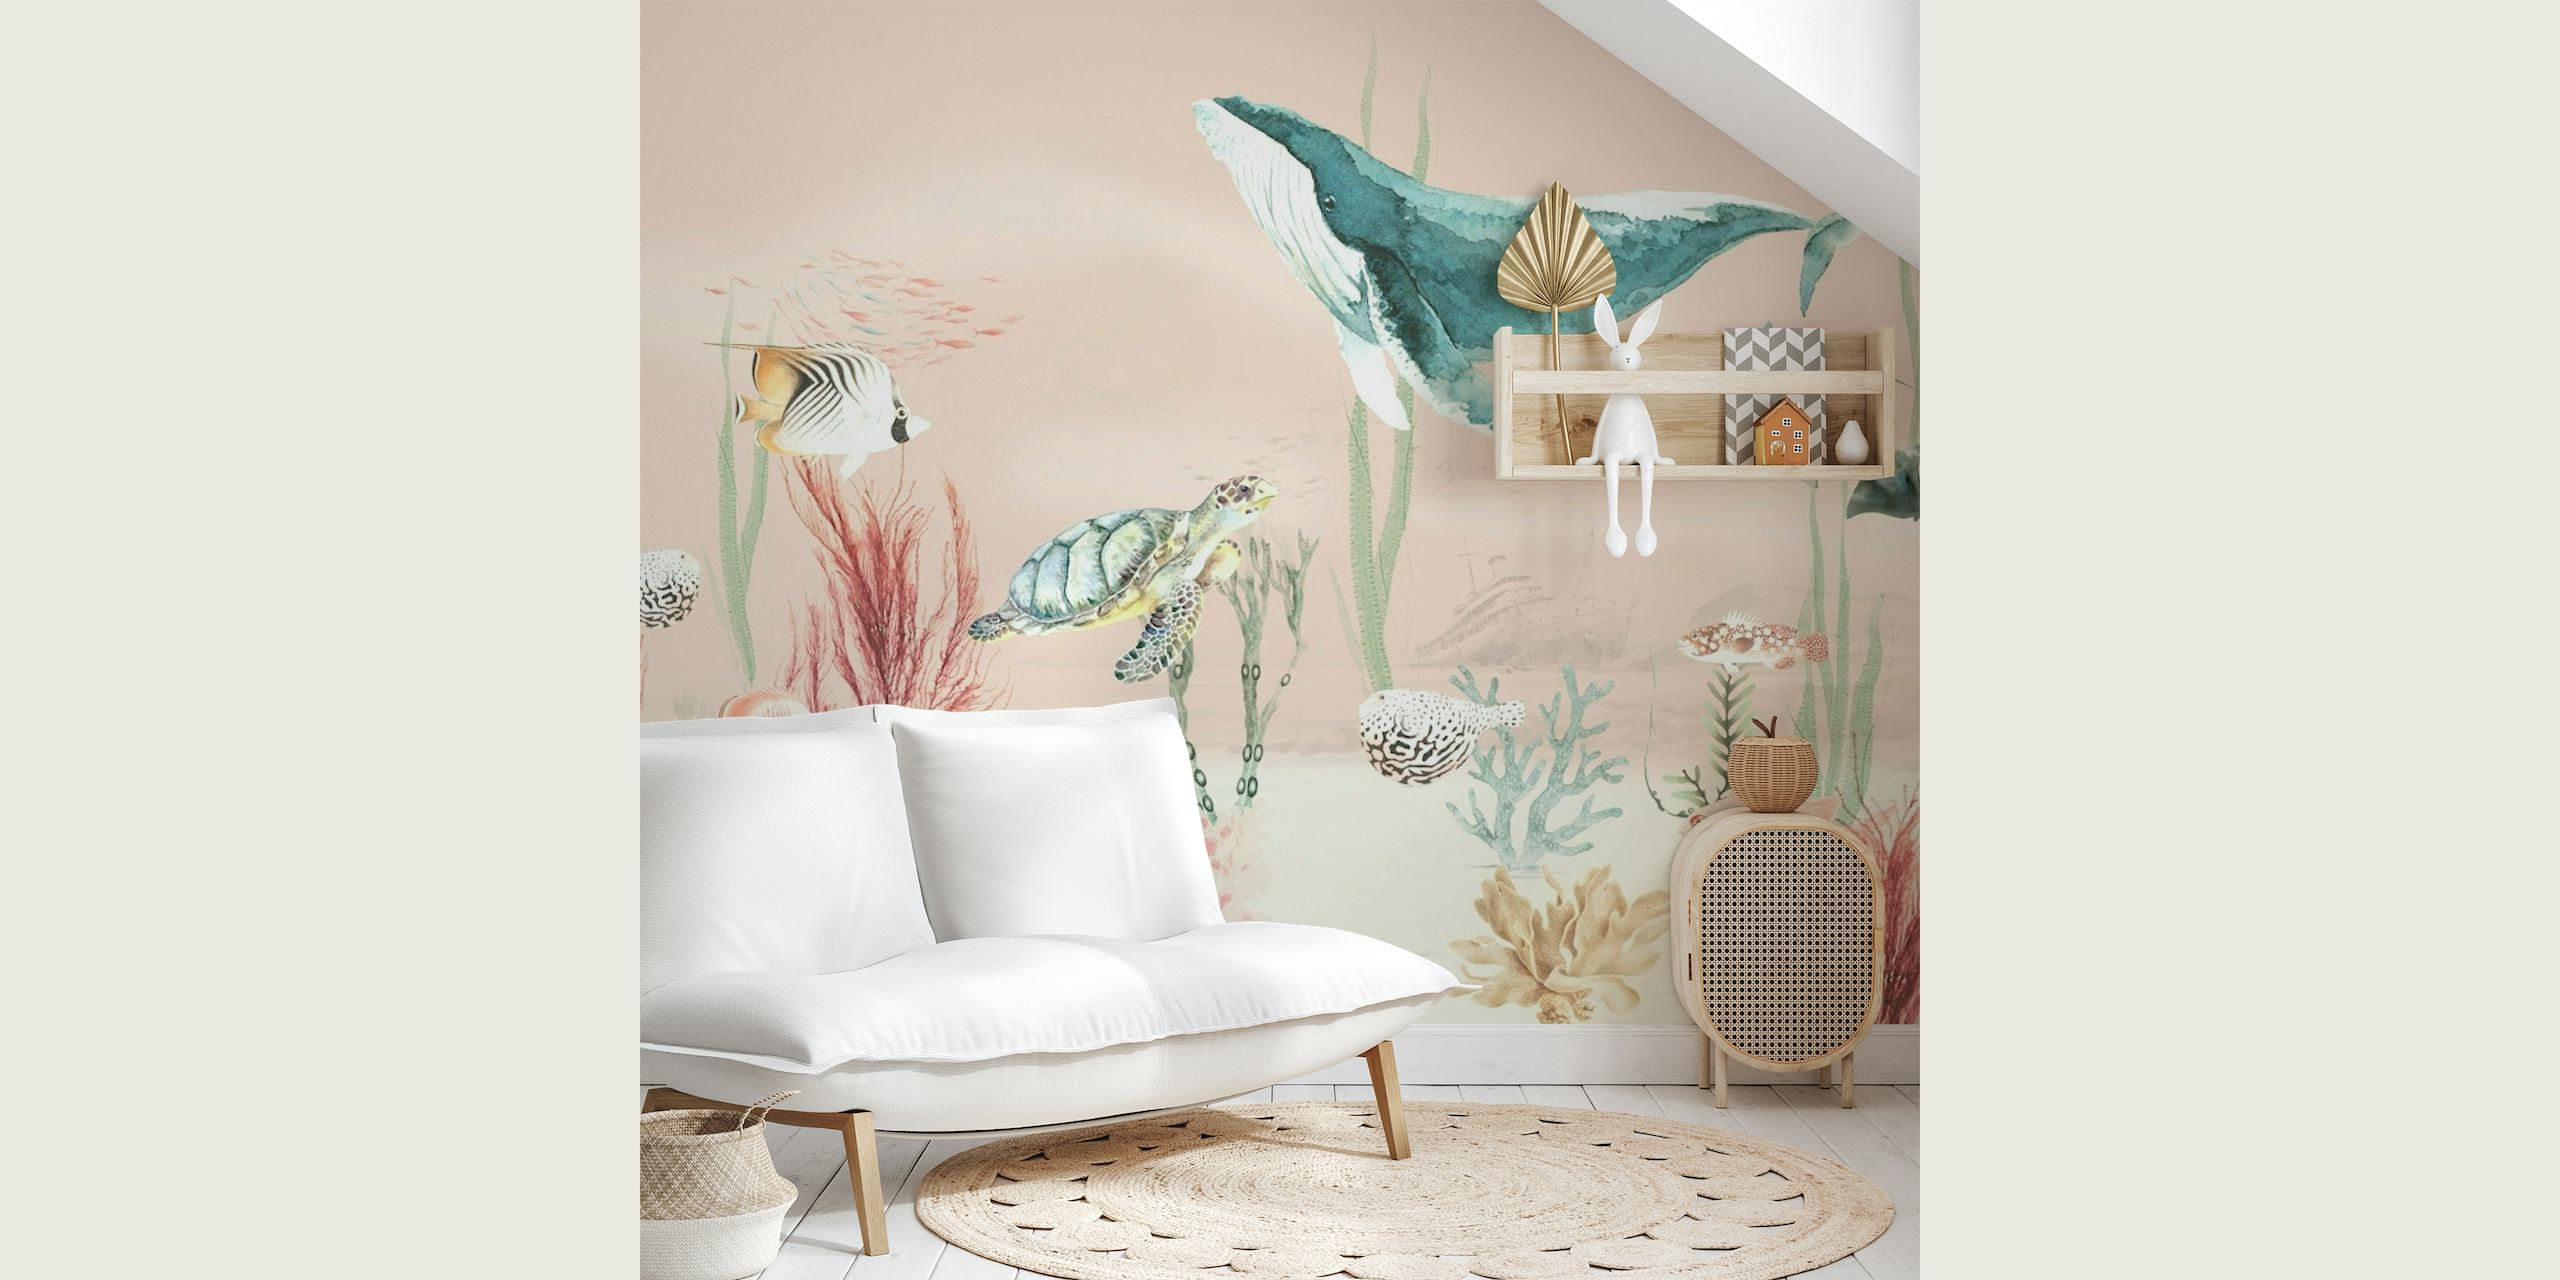 Whimsical sea turtle and stingray wall mural in blush pink and aqua blue tones